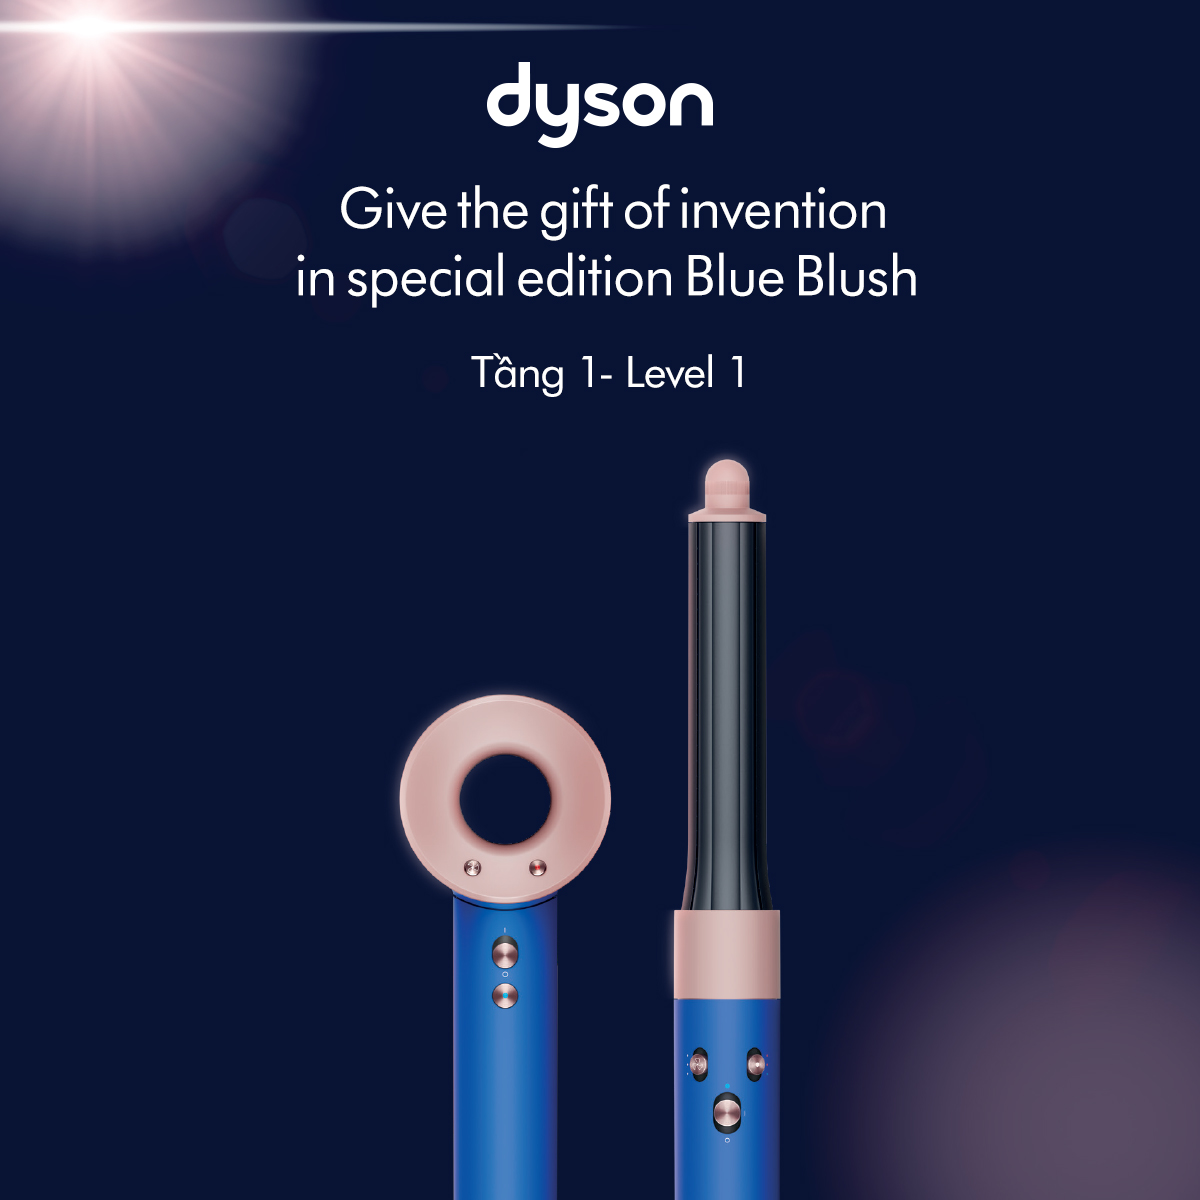 🎉BLUE BLUSH - EXPLORE THE BREAKTHROUGH GIFT FROM DYSON🎉